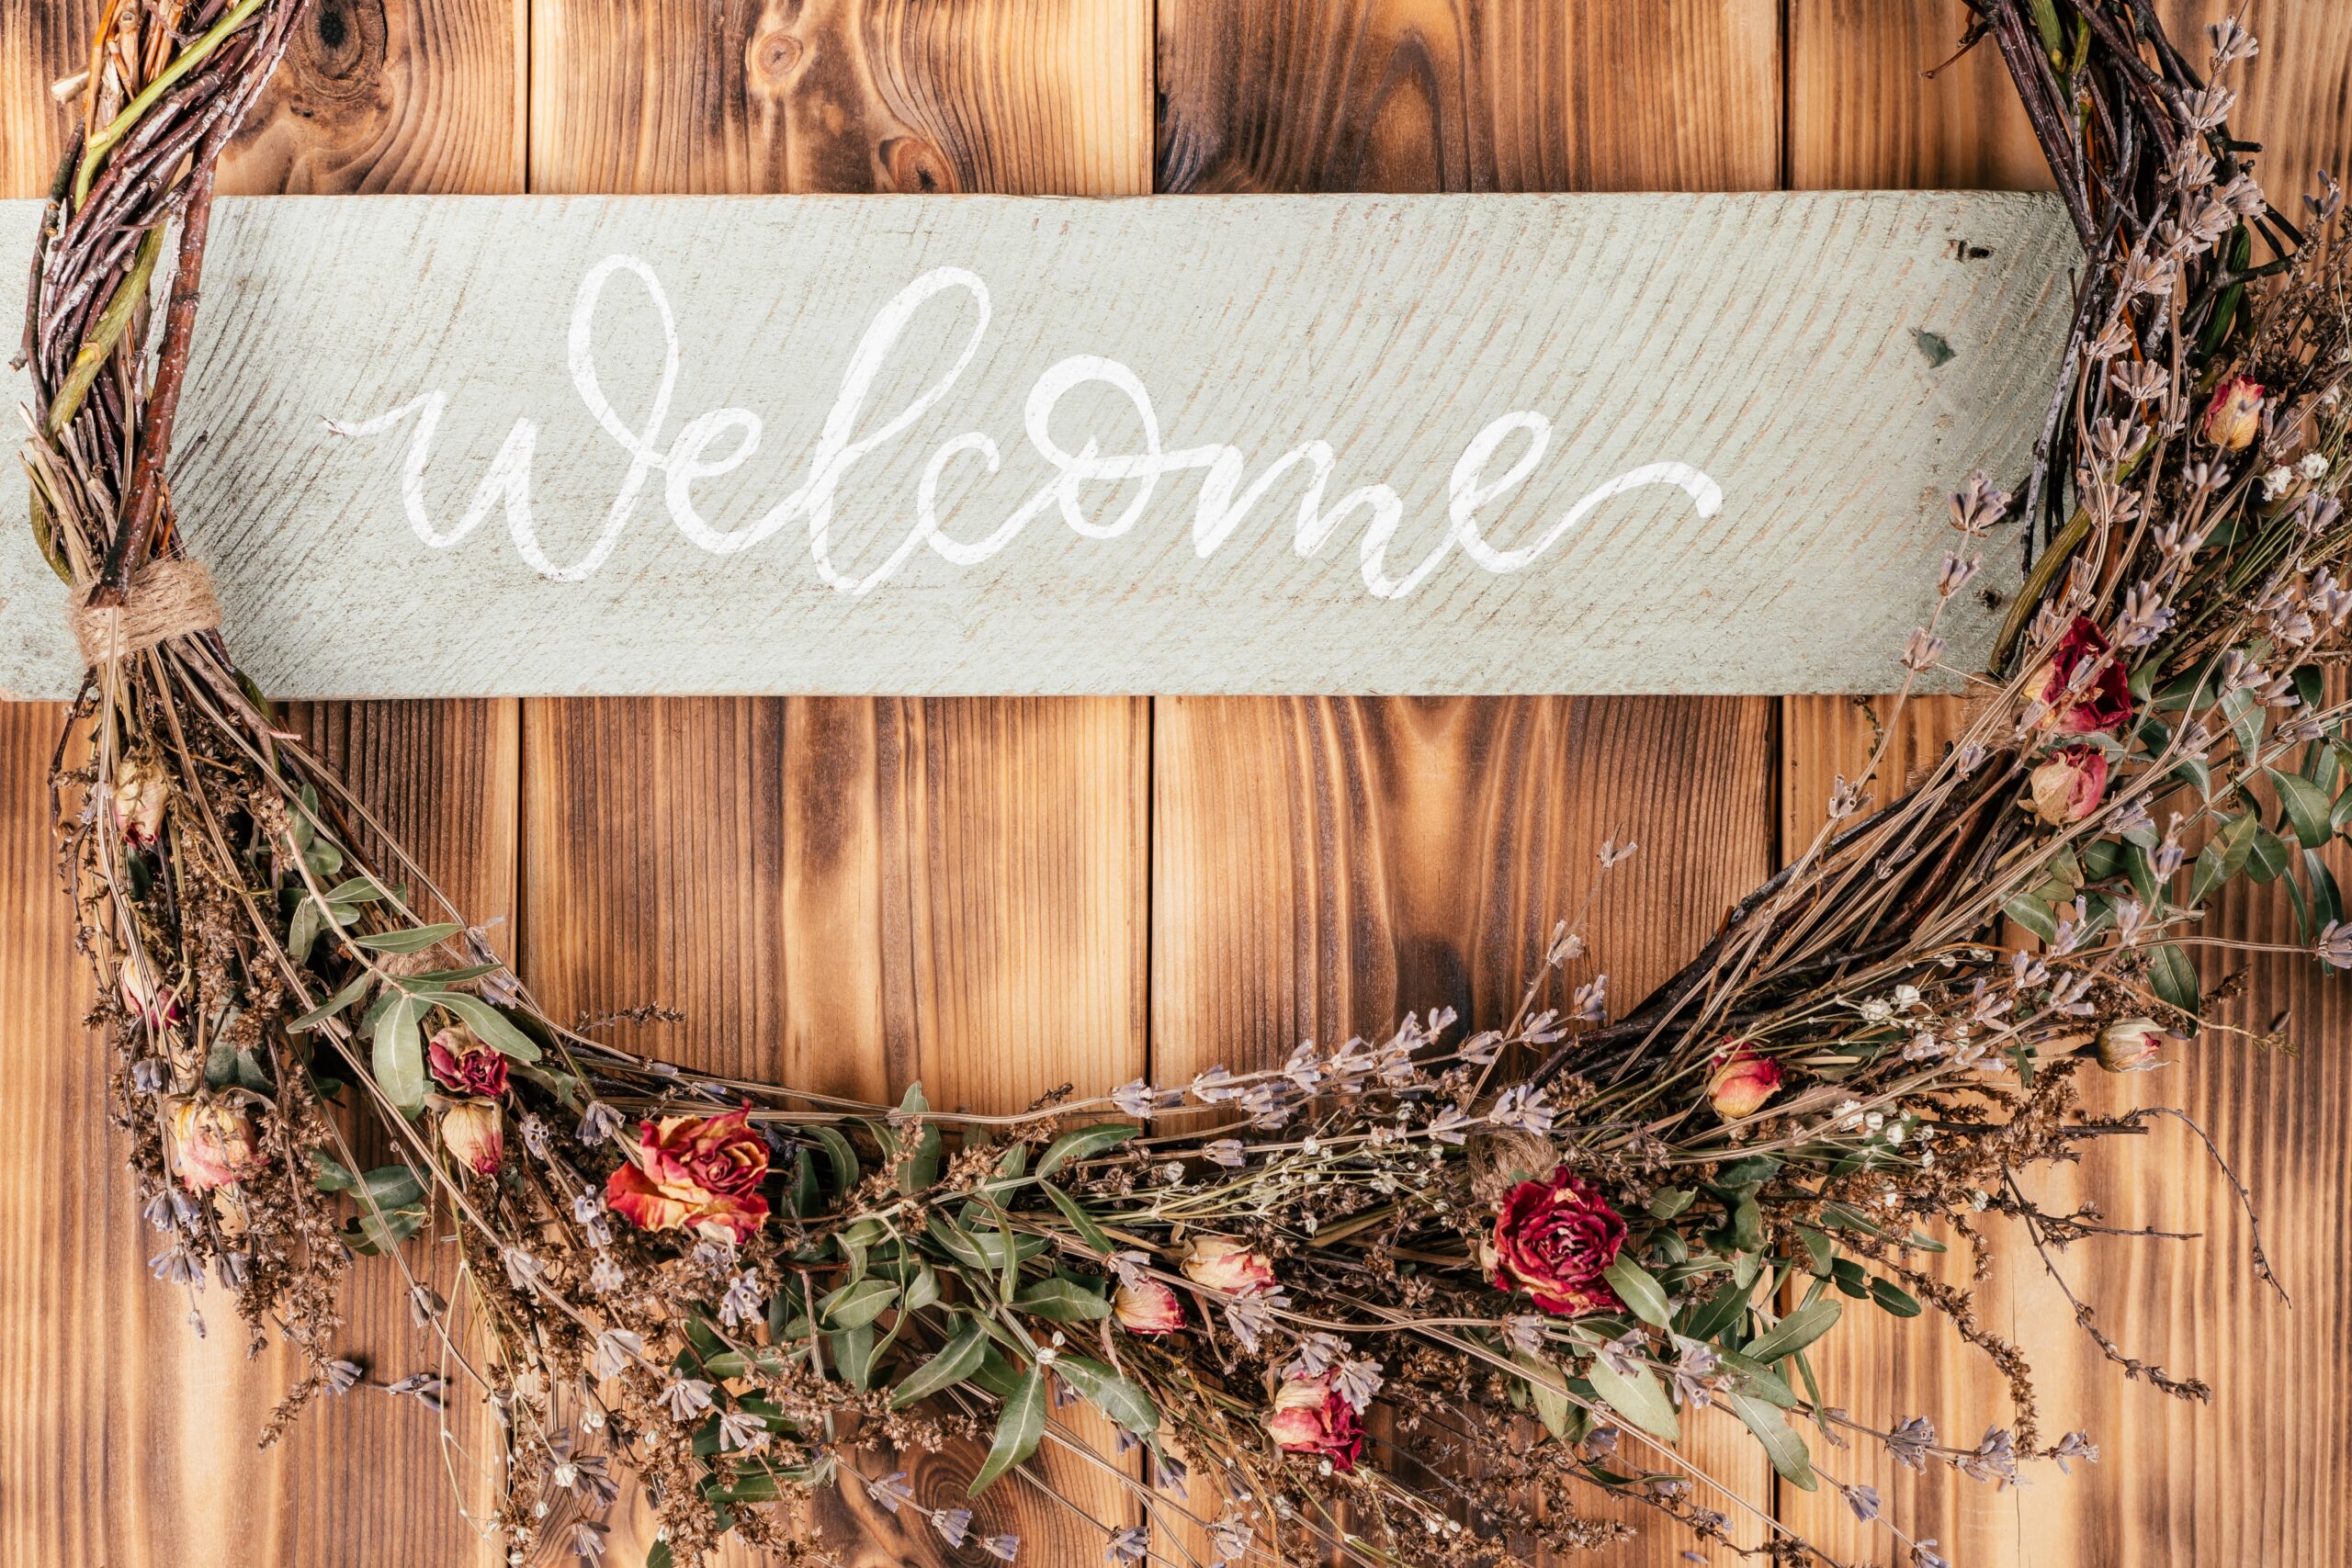 Dried flower, crafting tightly woven wreath with string and name board welcome. Rustic brown wooden and planking door on background. Celebration, preparation, warm greeting of guests. No people